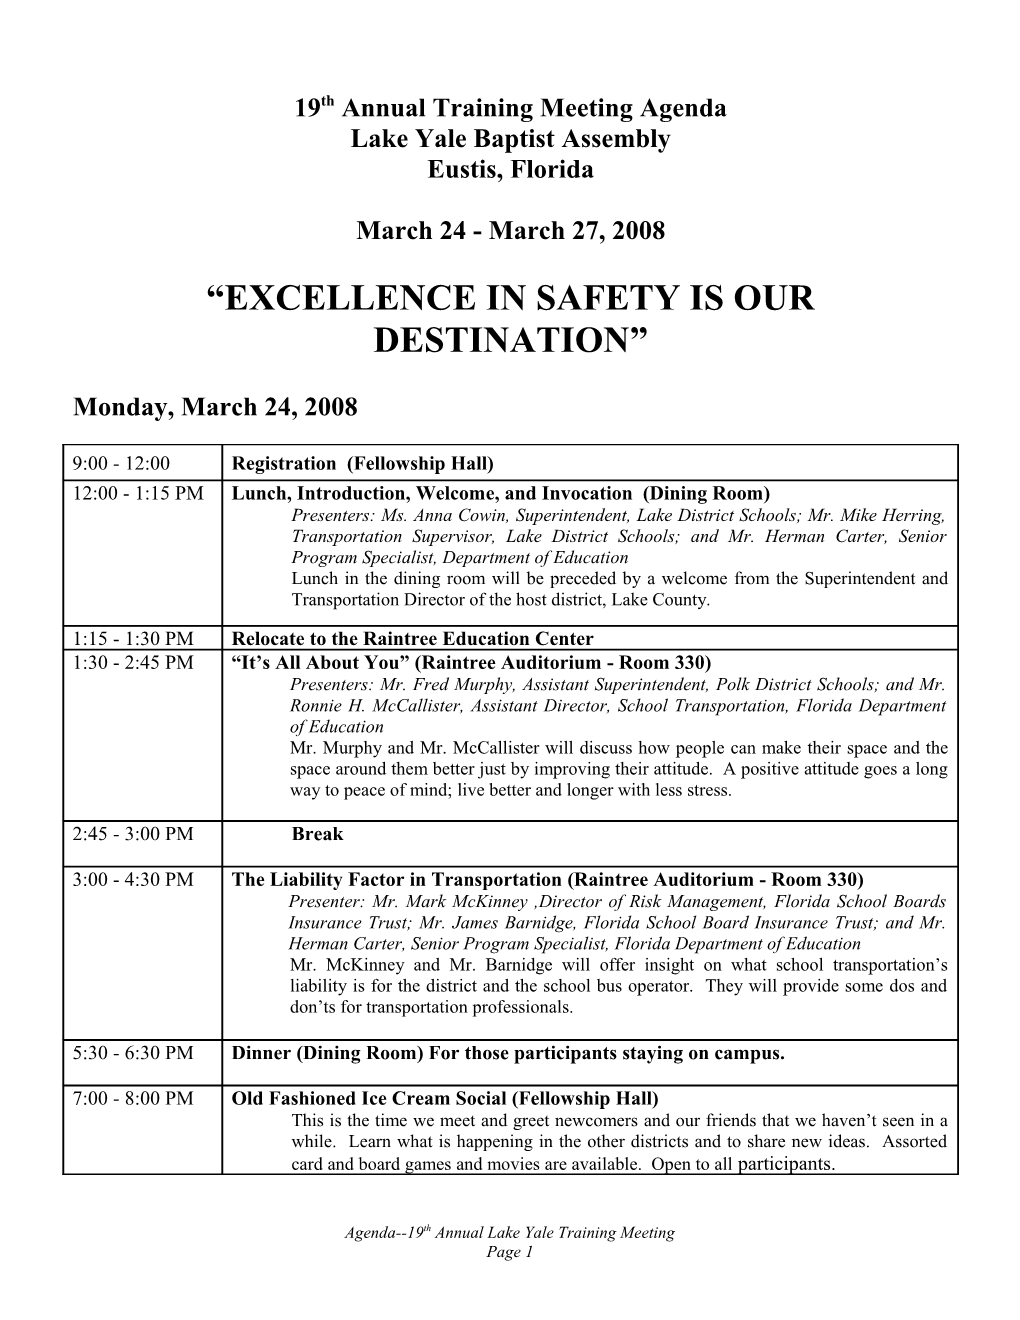 1996 Leadership and Transporting Students with Special Needs in Florida Workshop Tenative Agenda